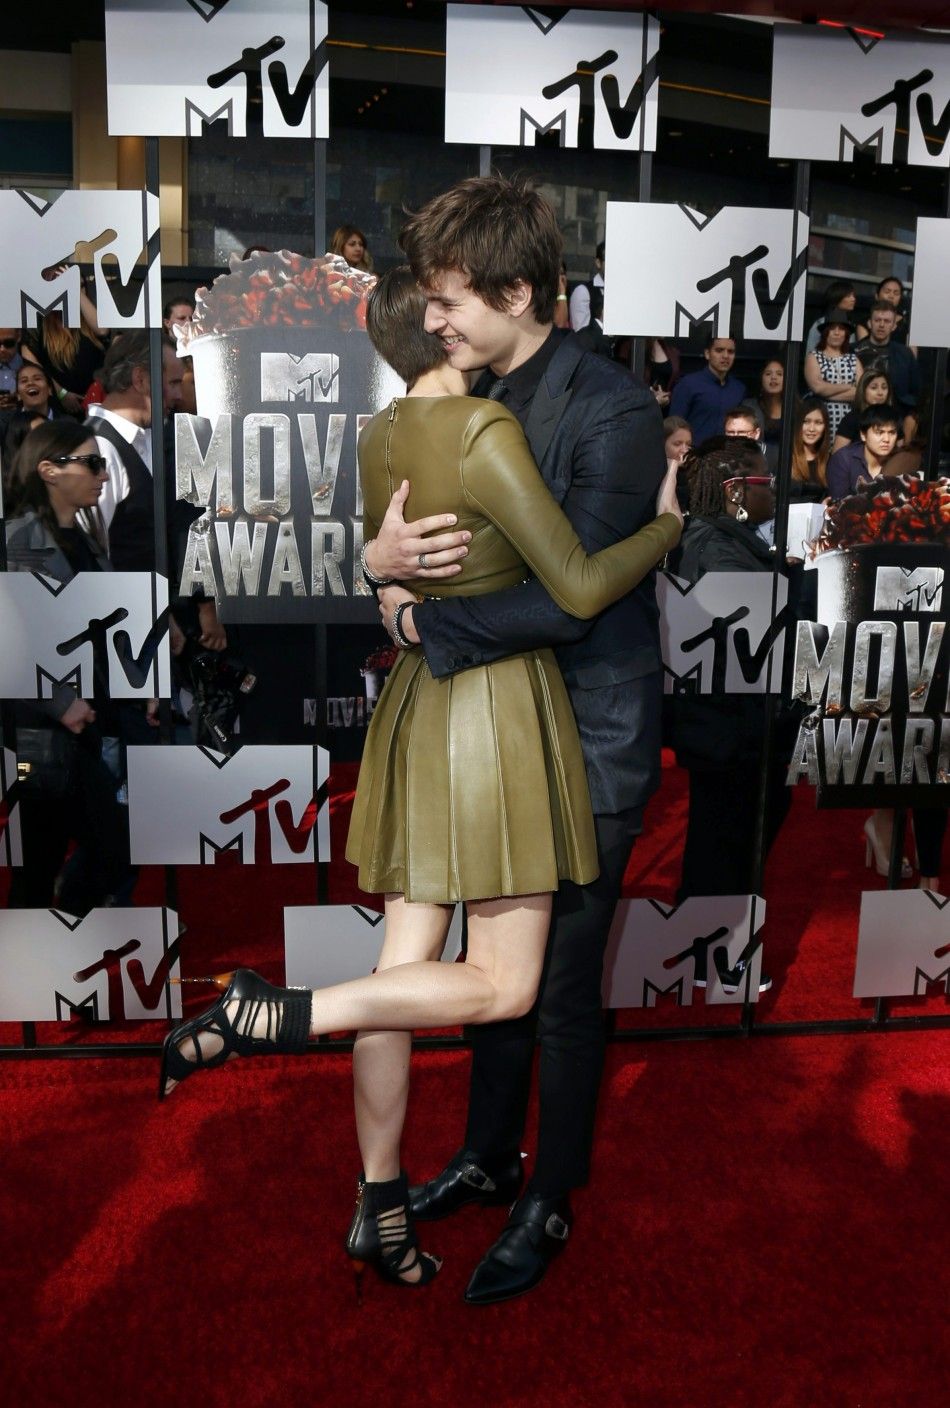 Shailene Woodley greets actor Ansel Elgort on the red carpet at the 2014 MTV Movie Awards in Los Angeles